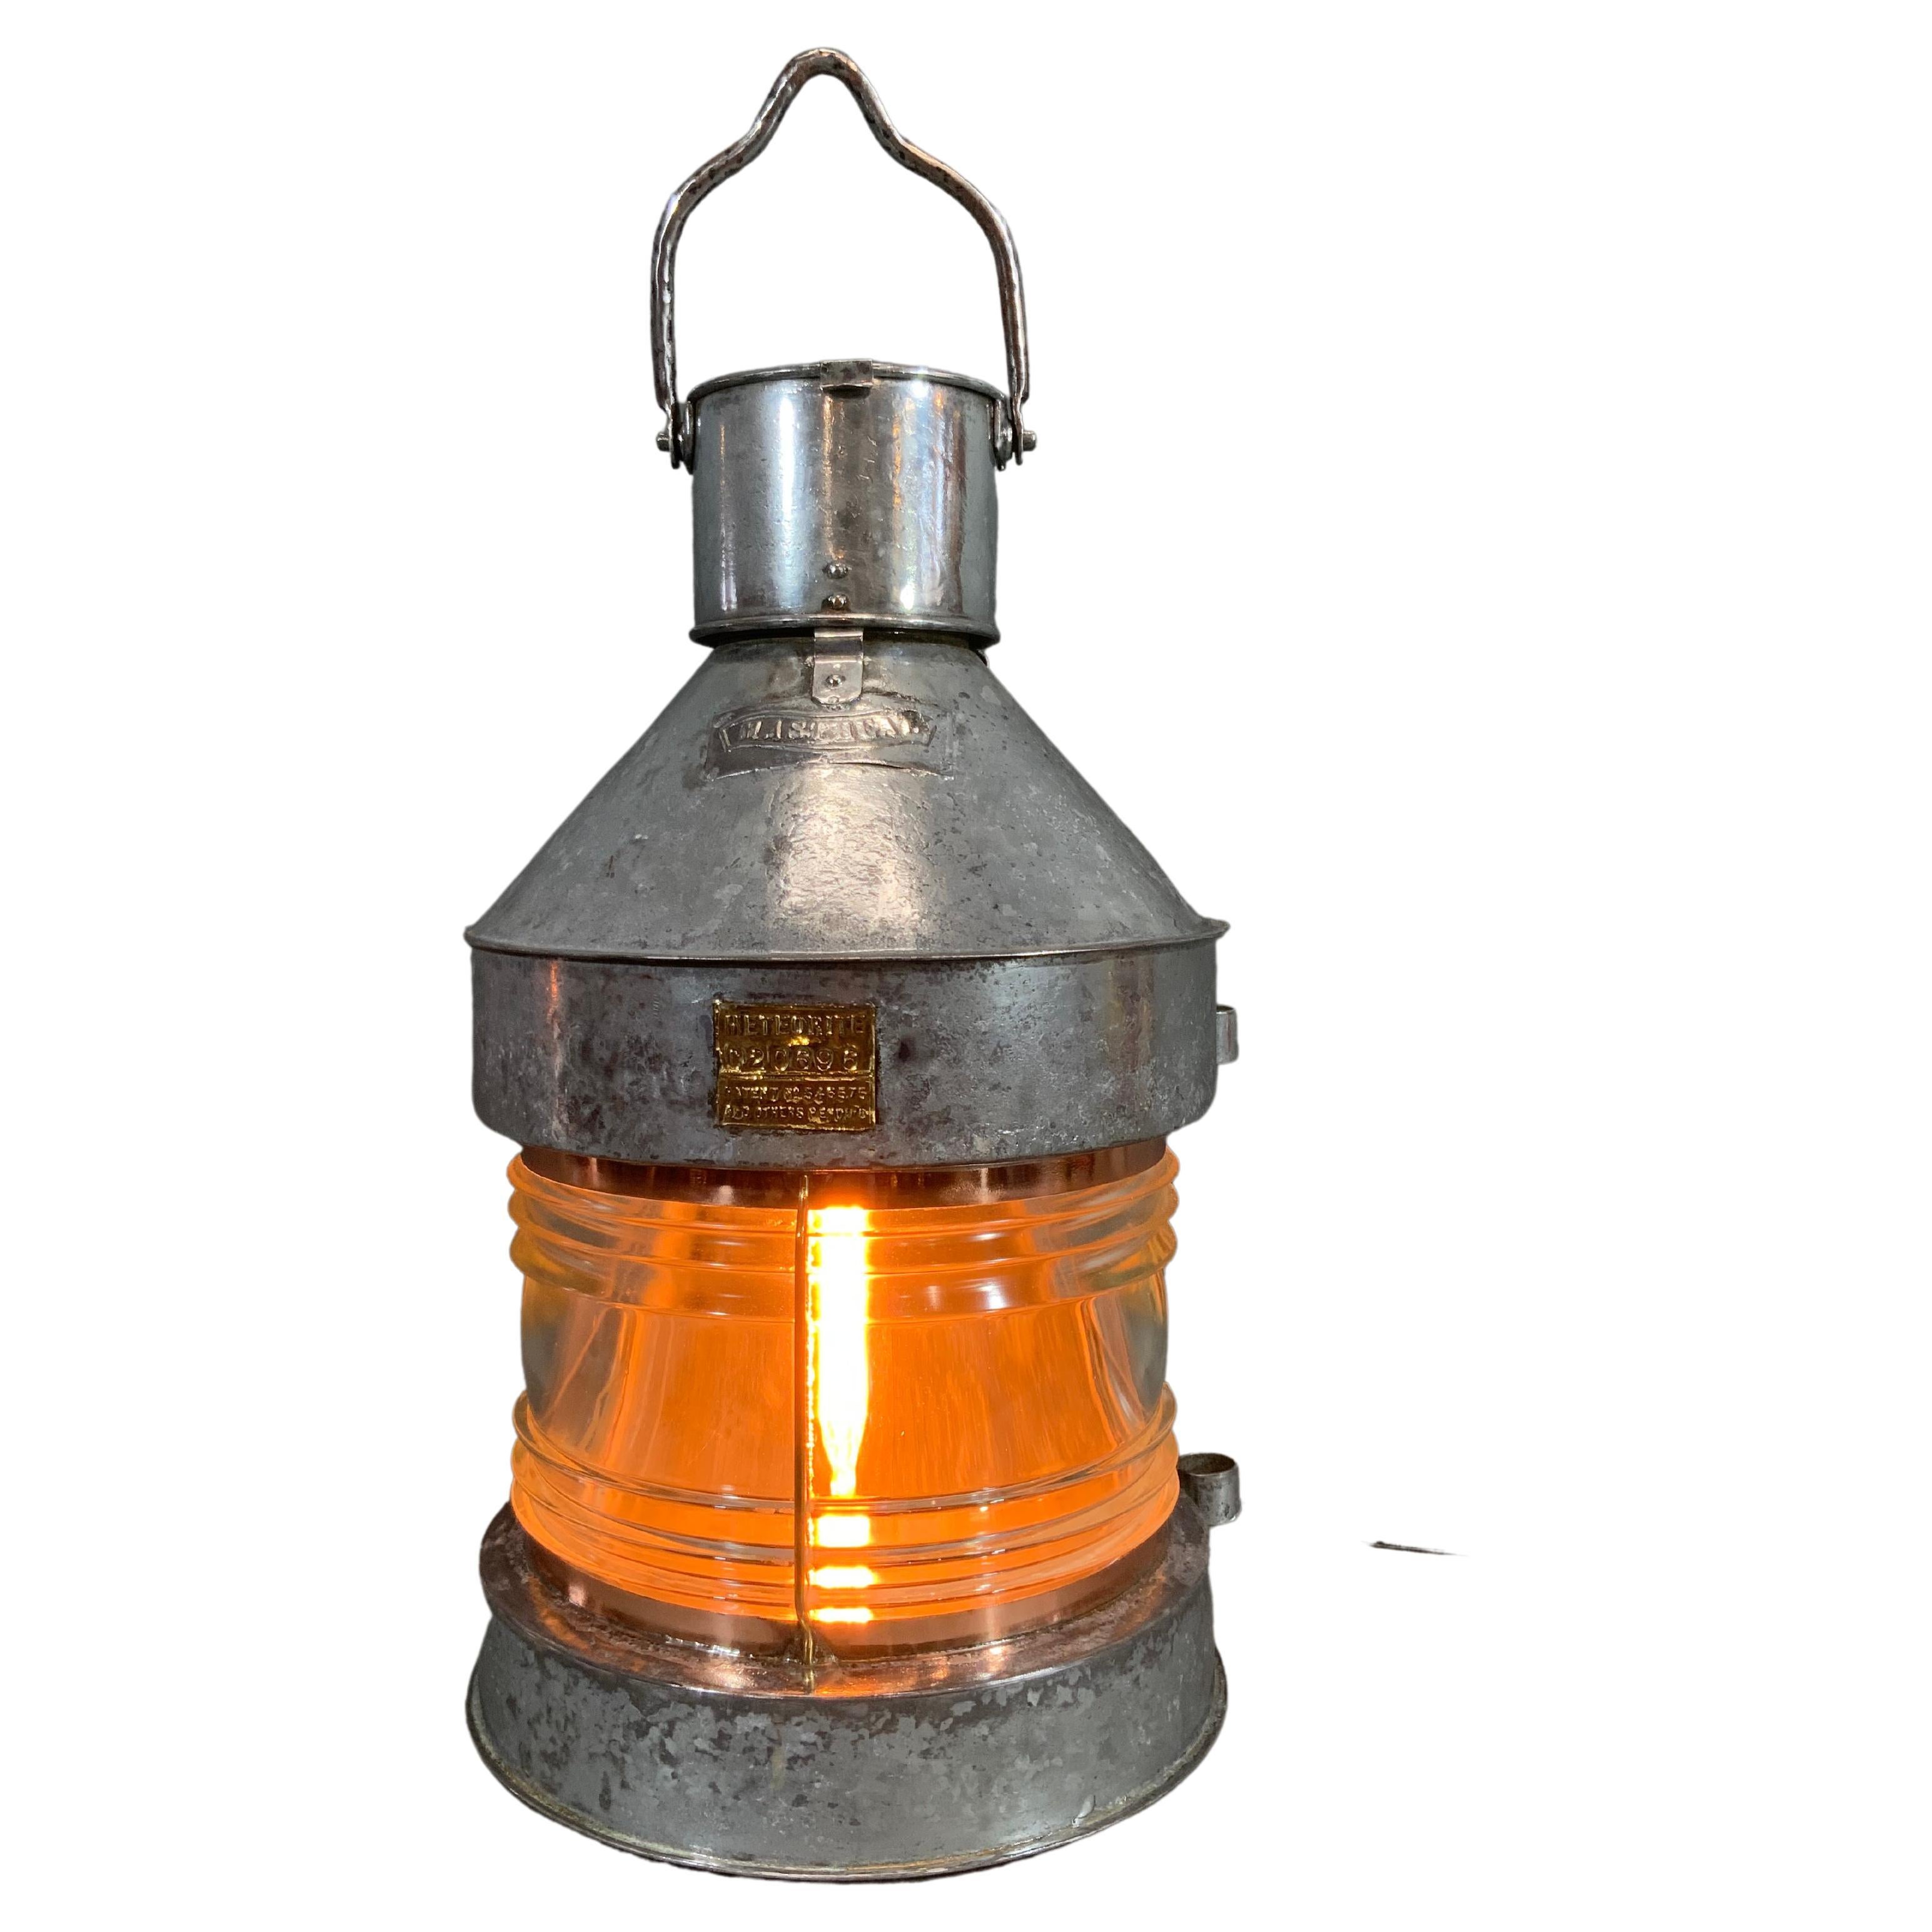 Polished Steel Ship's Masthead Lantern with Fresnel Lens by Meteorite "C20696"